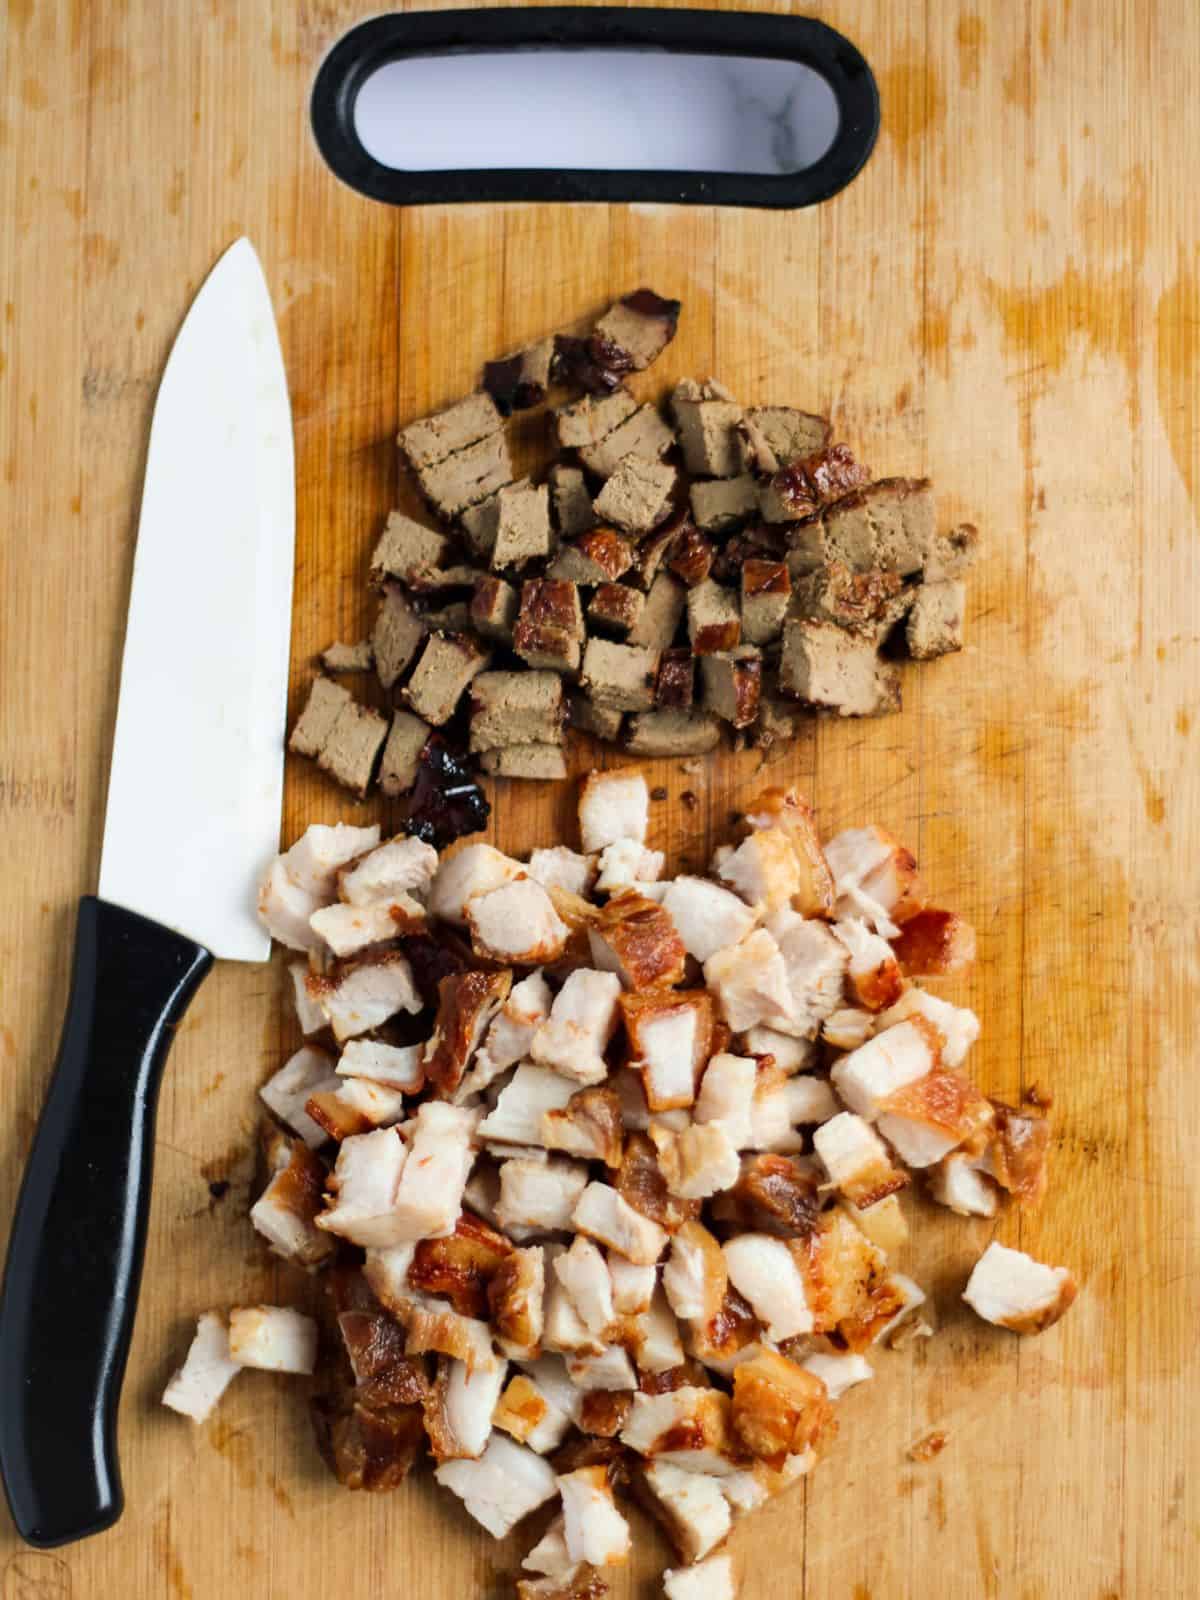 Chopped pork belly and pork liver in a chopping board.